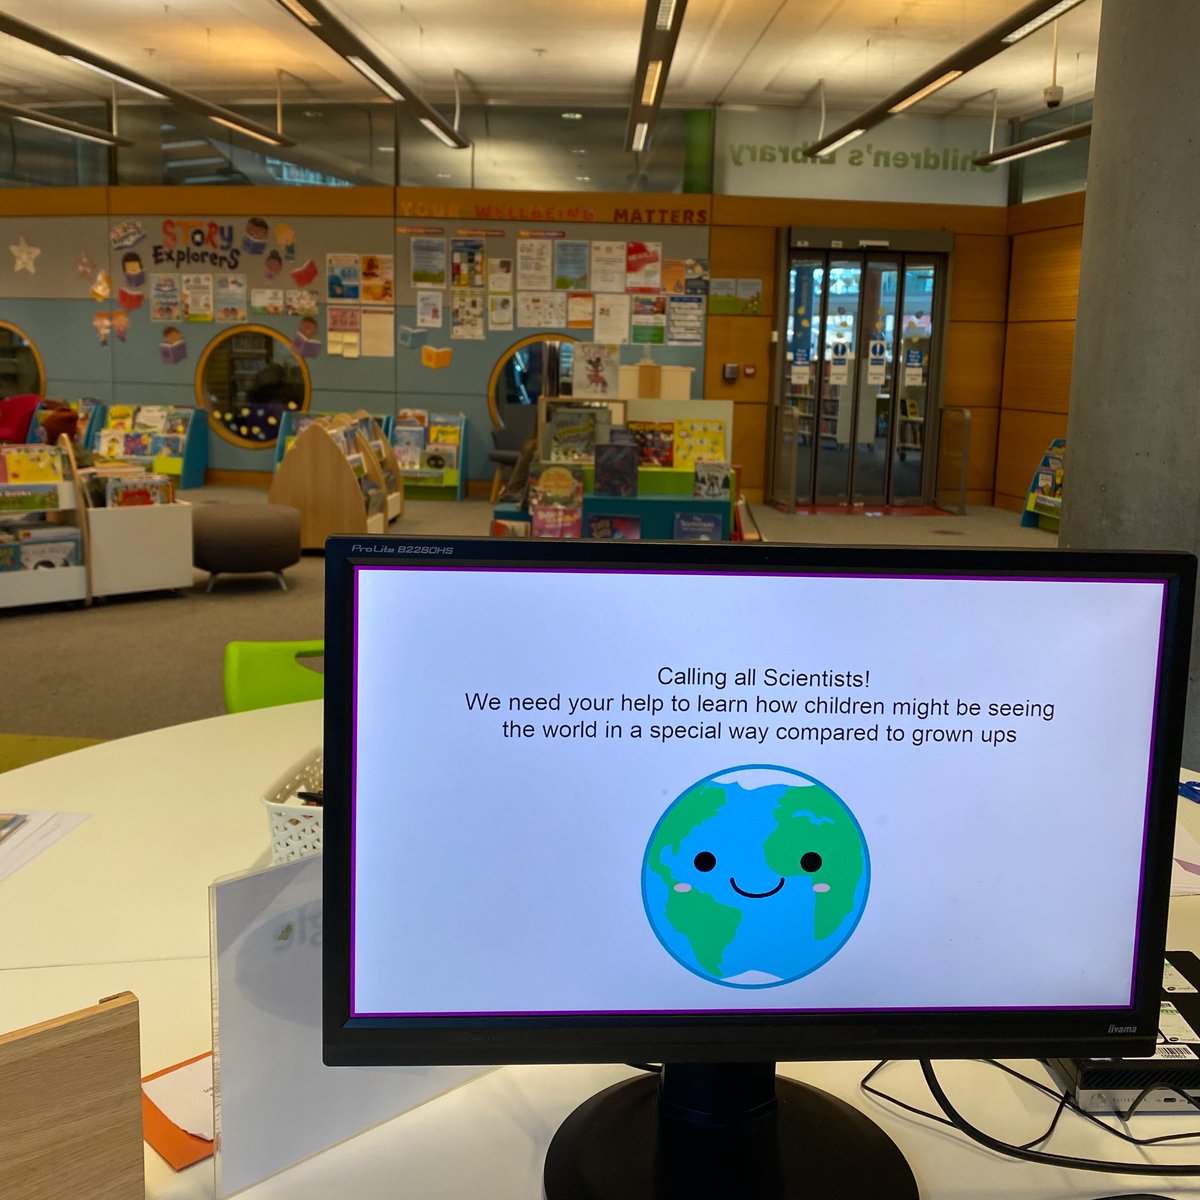 Today the @DDPSYUEA pop-up lab is visiting @MillenniumLib with lots of fun psychology themed activities for kids! 🧠